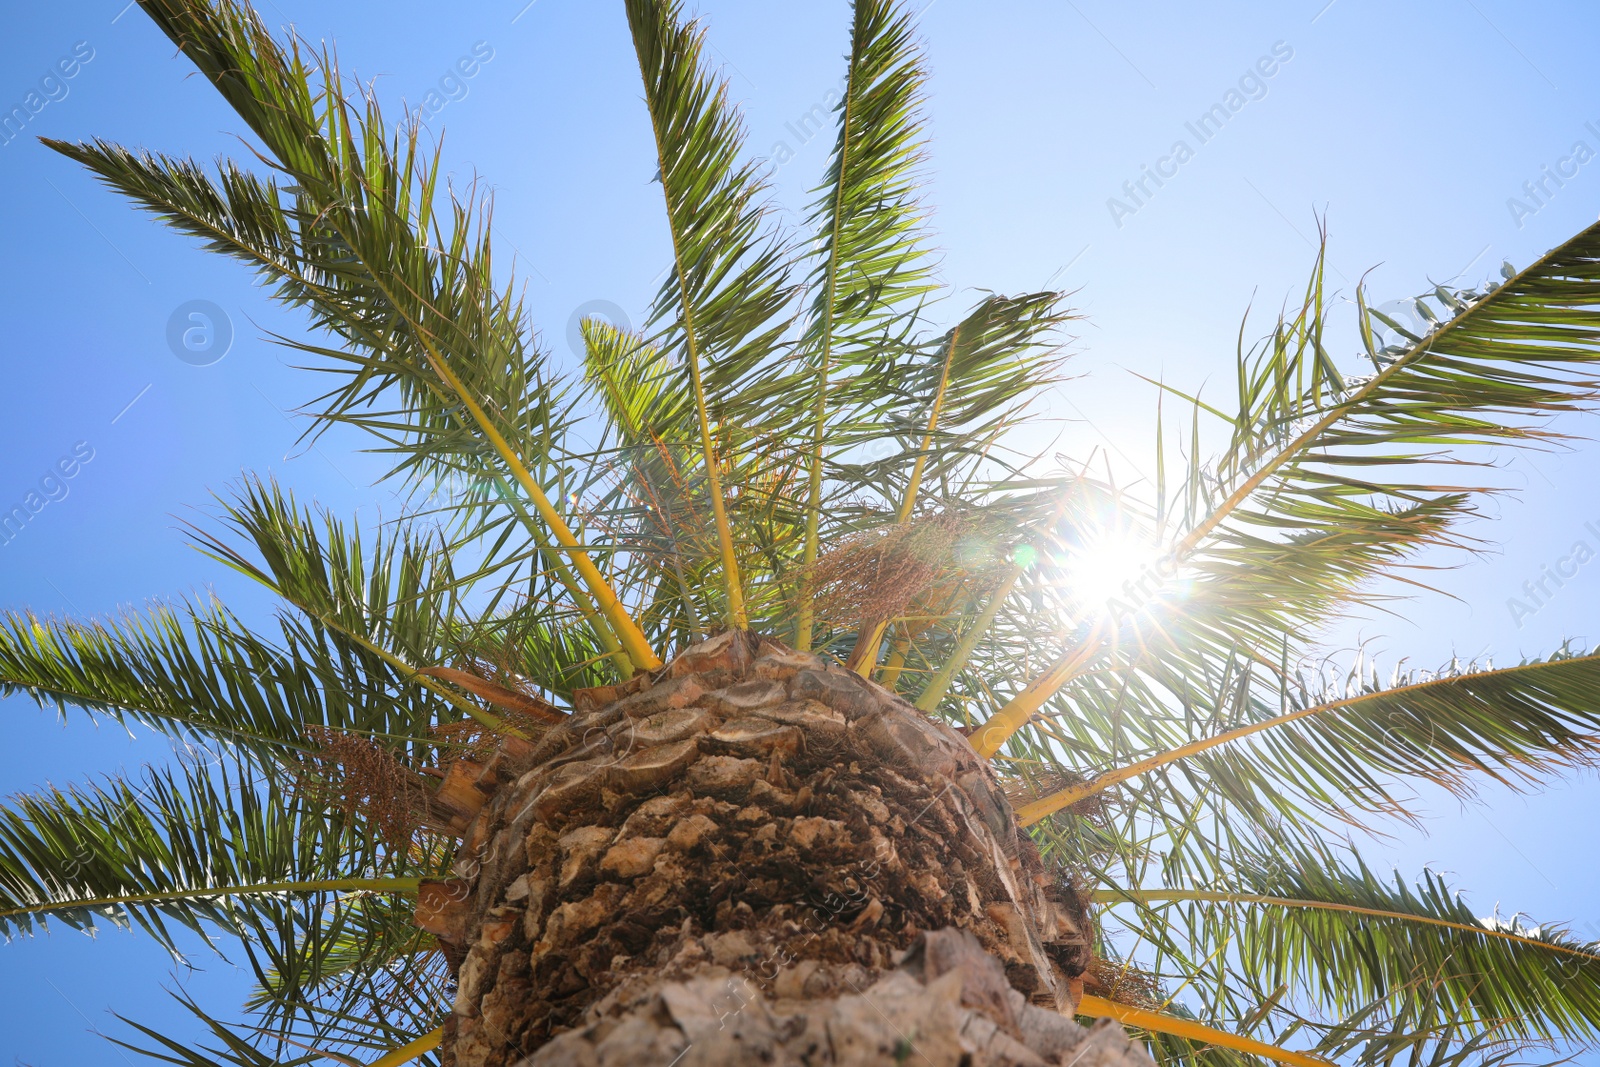 Photo of Beautiful palm tree with green leaves against clear blue sky, bottom view